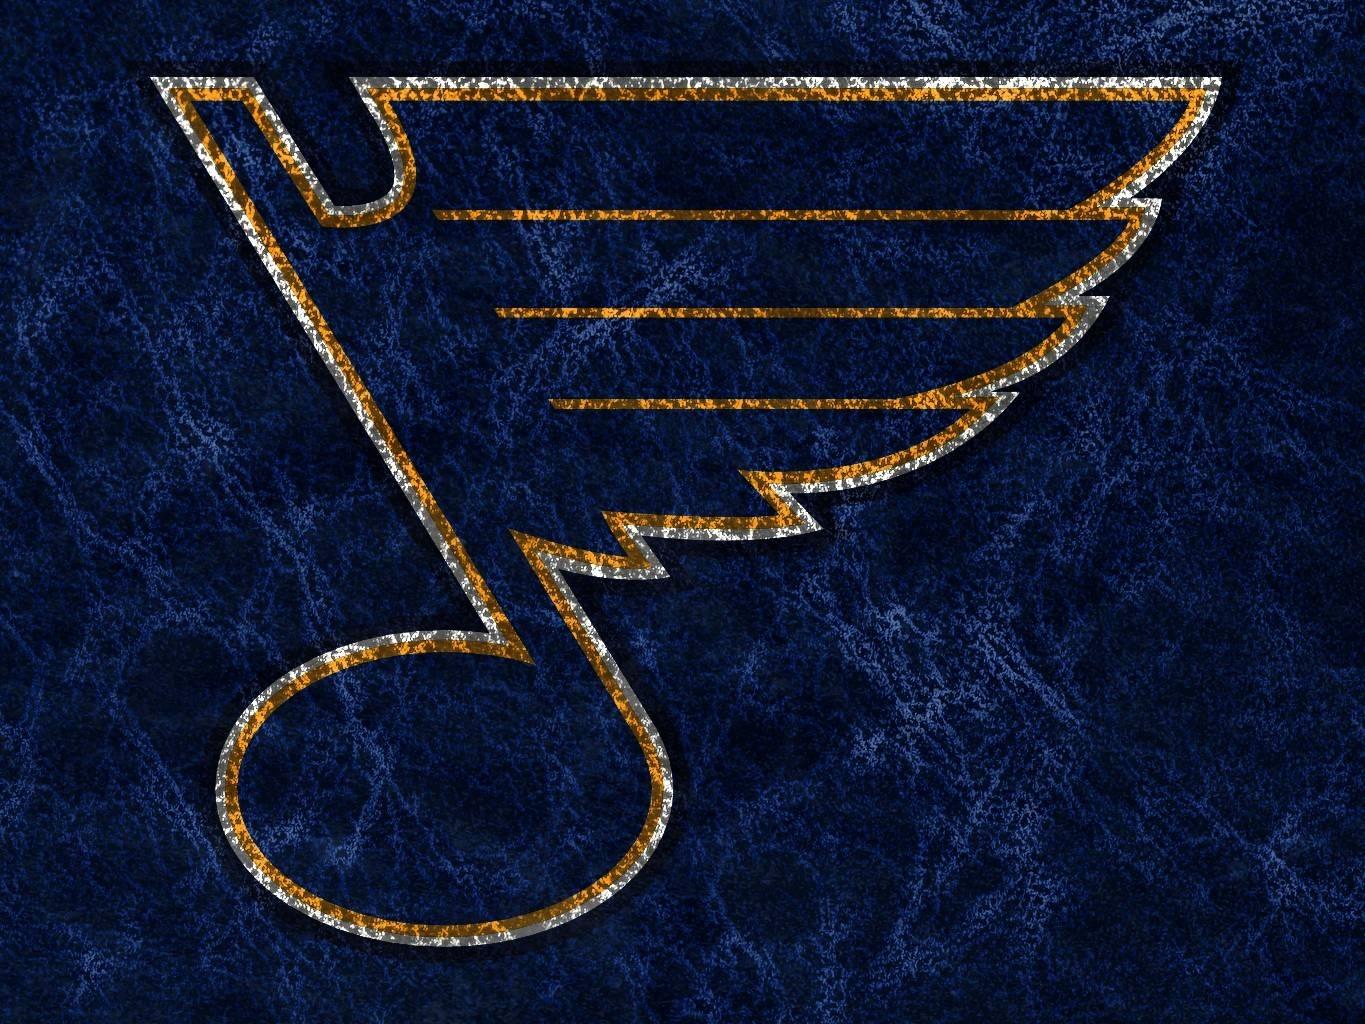 Top St Louis Blues Wallpaper Cell Phone FULL HD 1920×1080 For PC